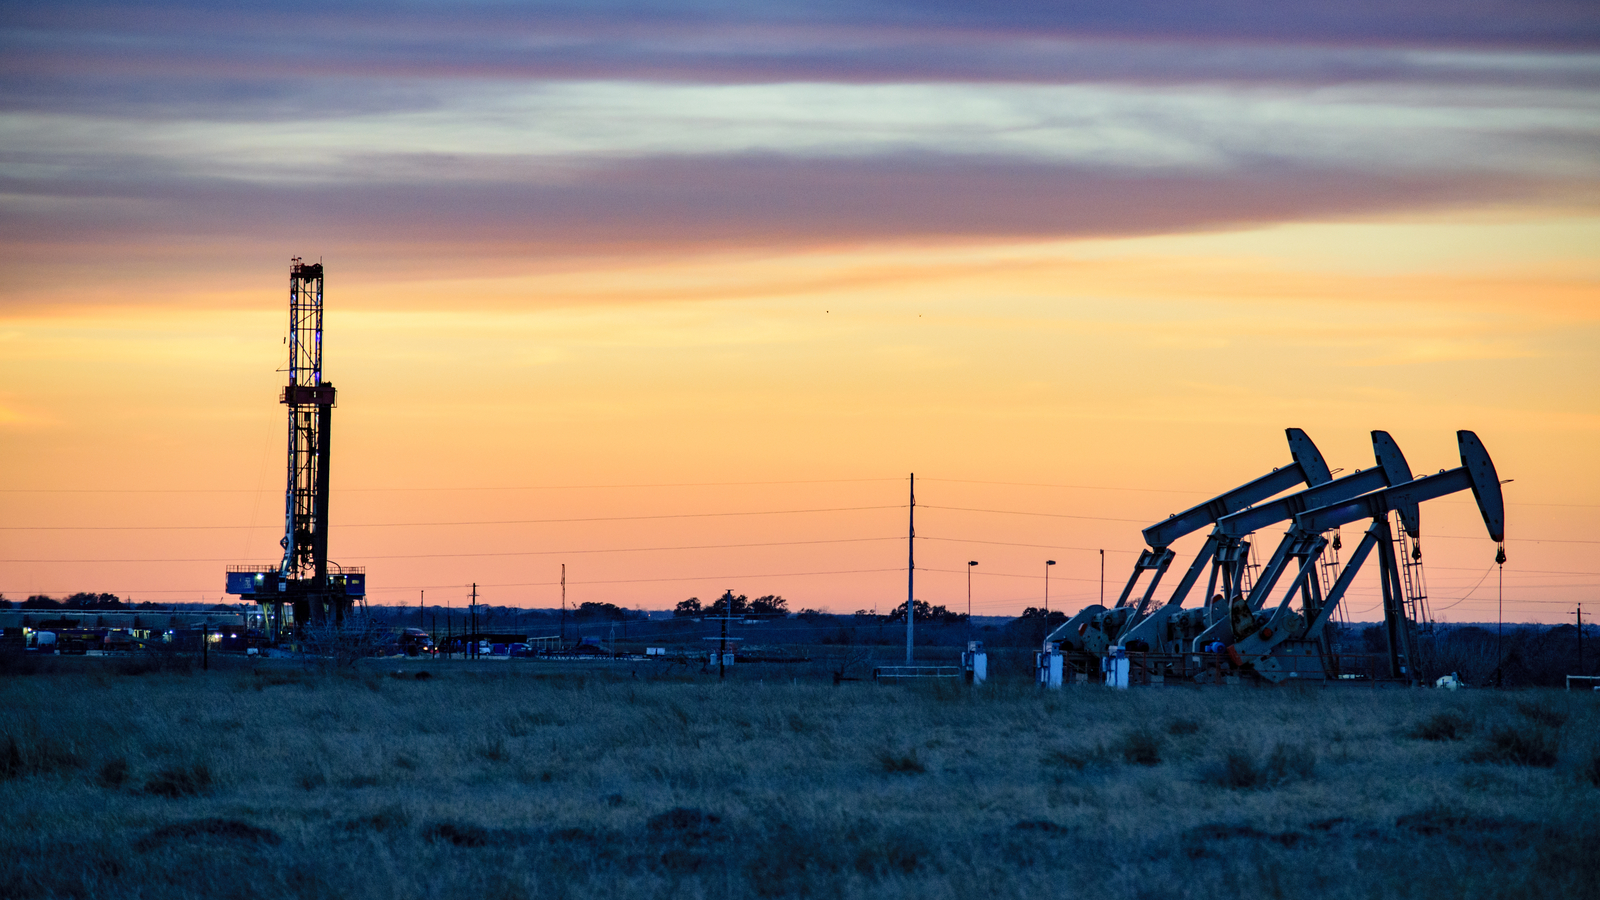 Image of an oil filed at the Permian Basin.